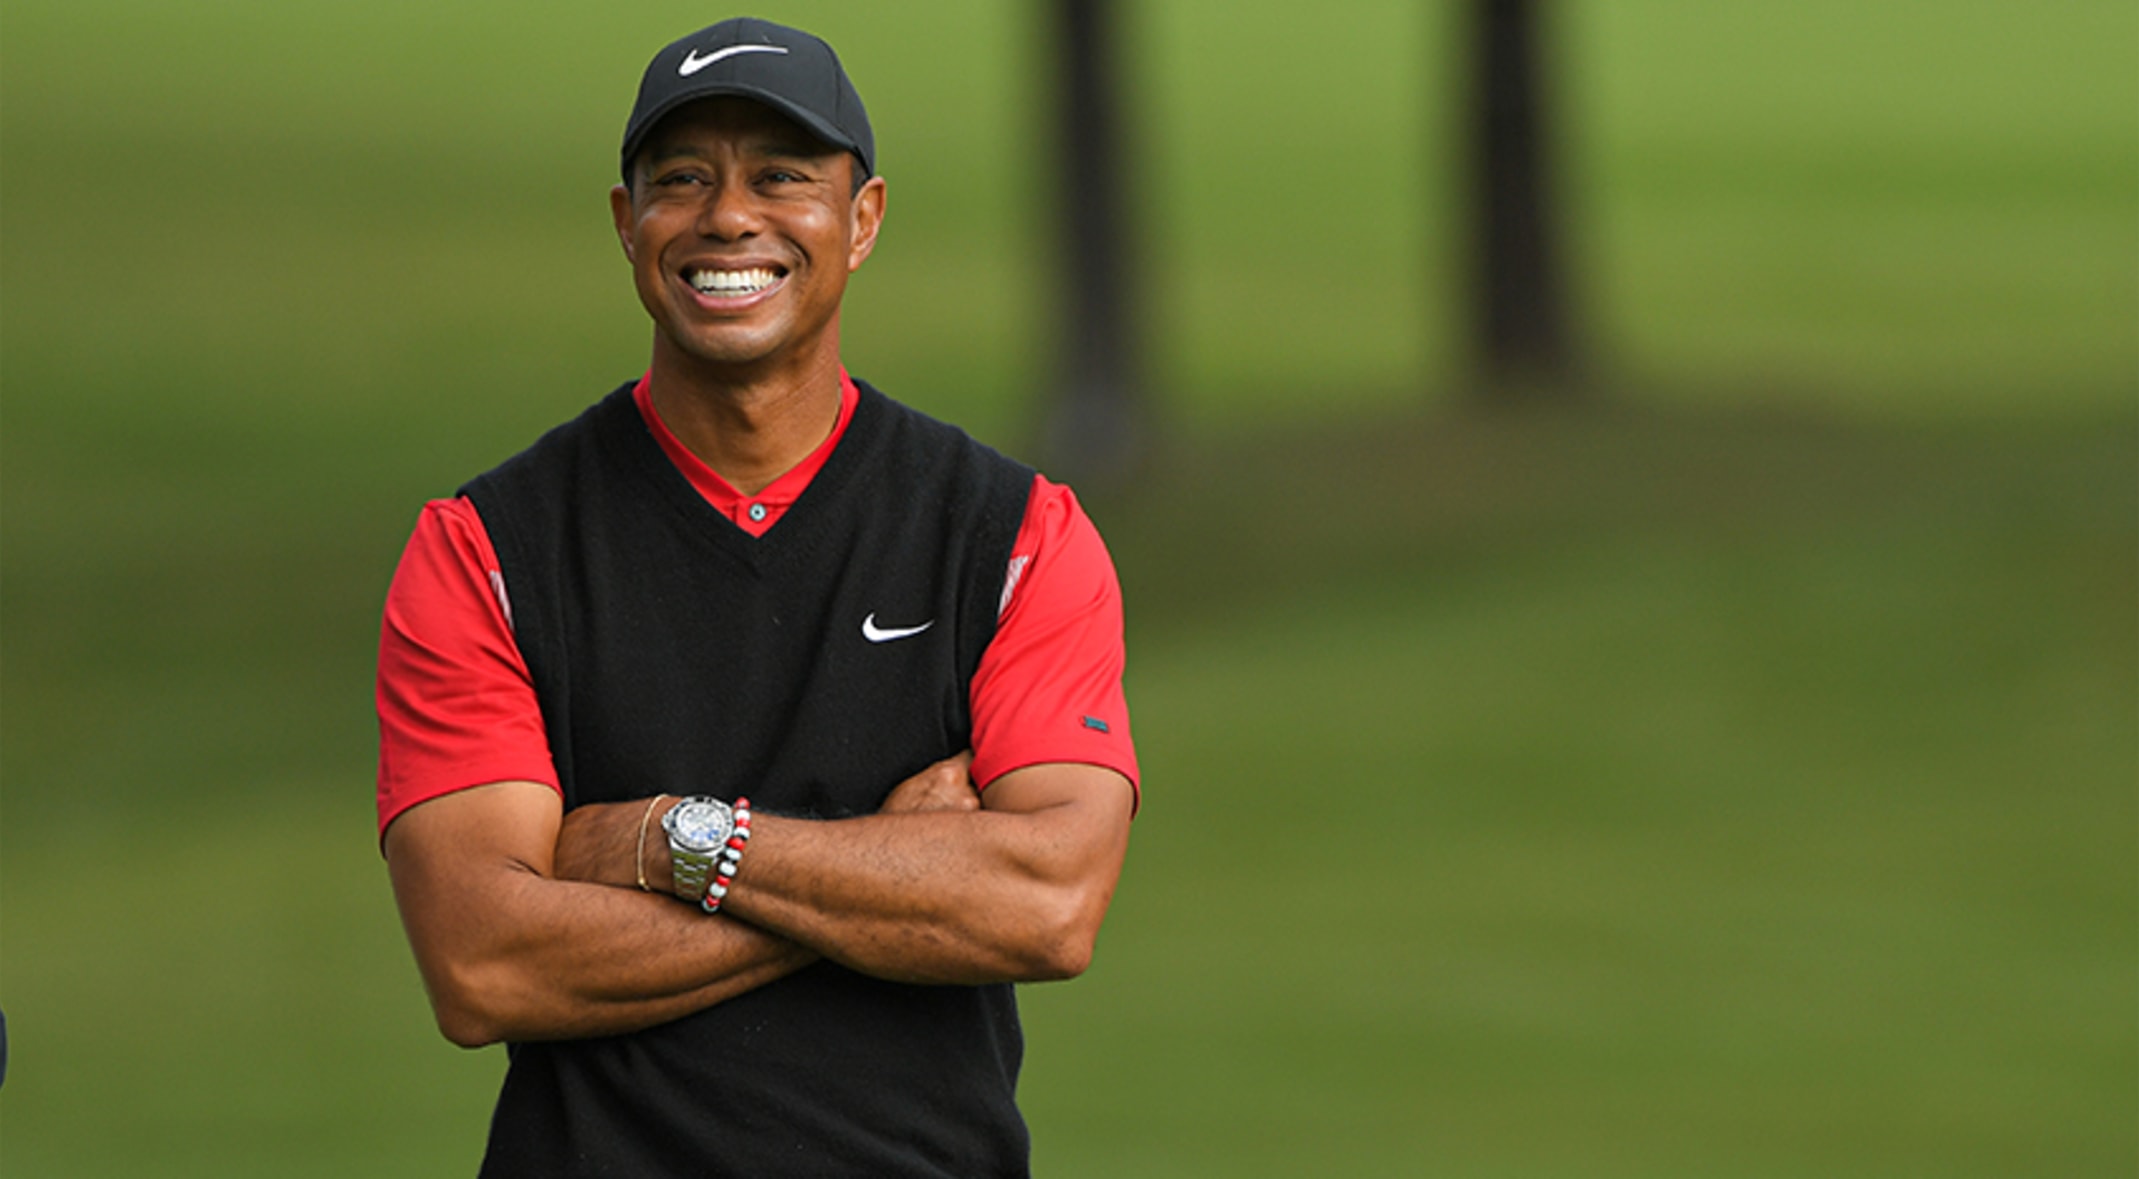 Tiger Woods wearing a red and black shirt and black cap